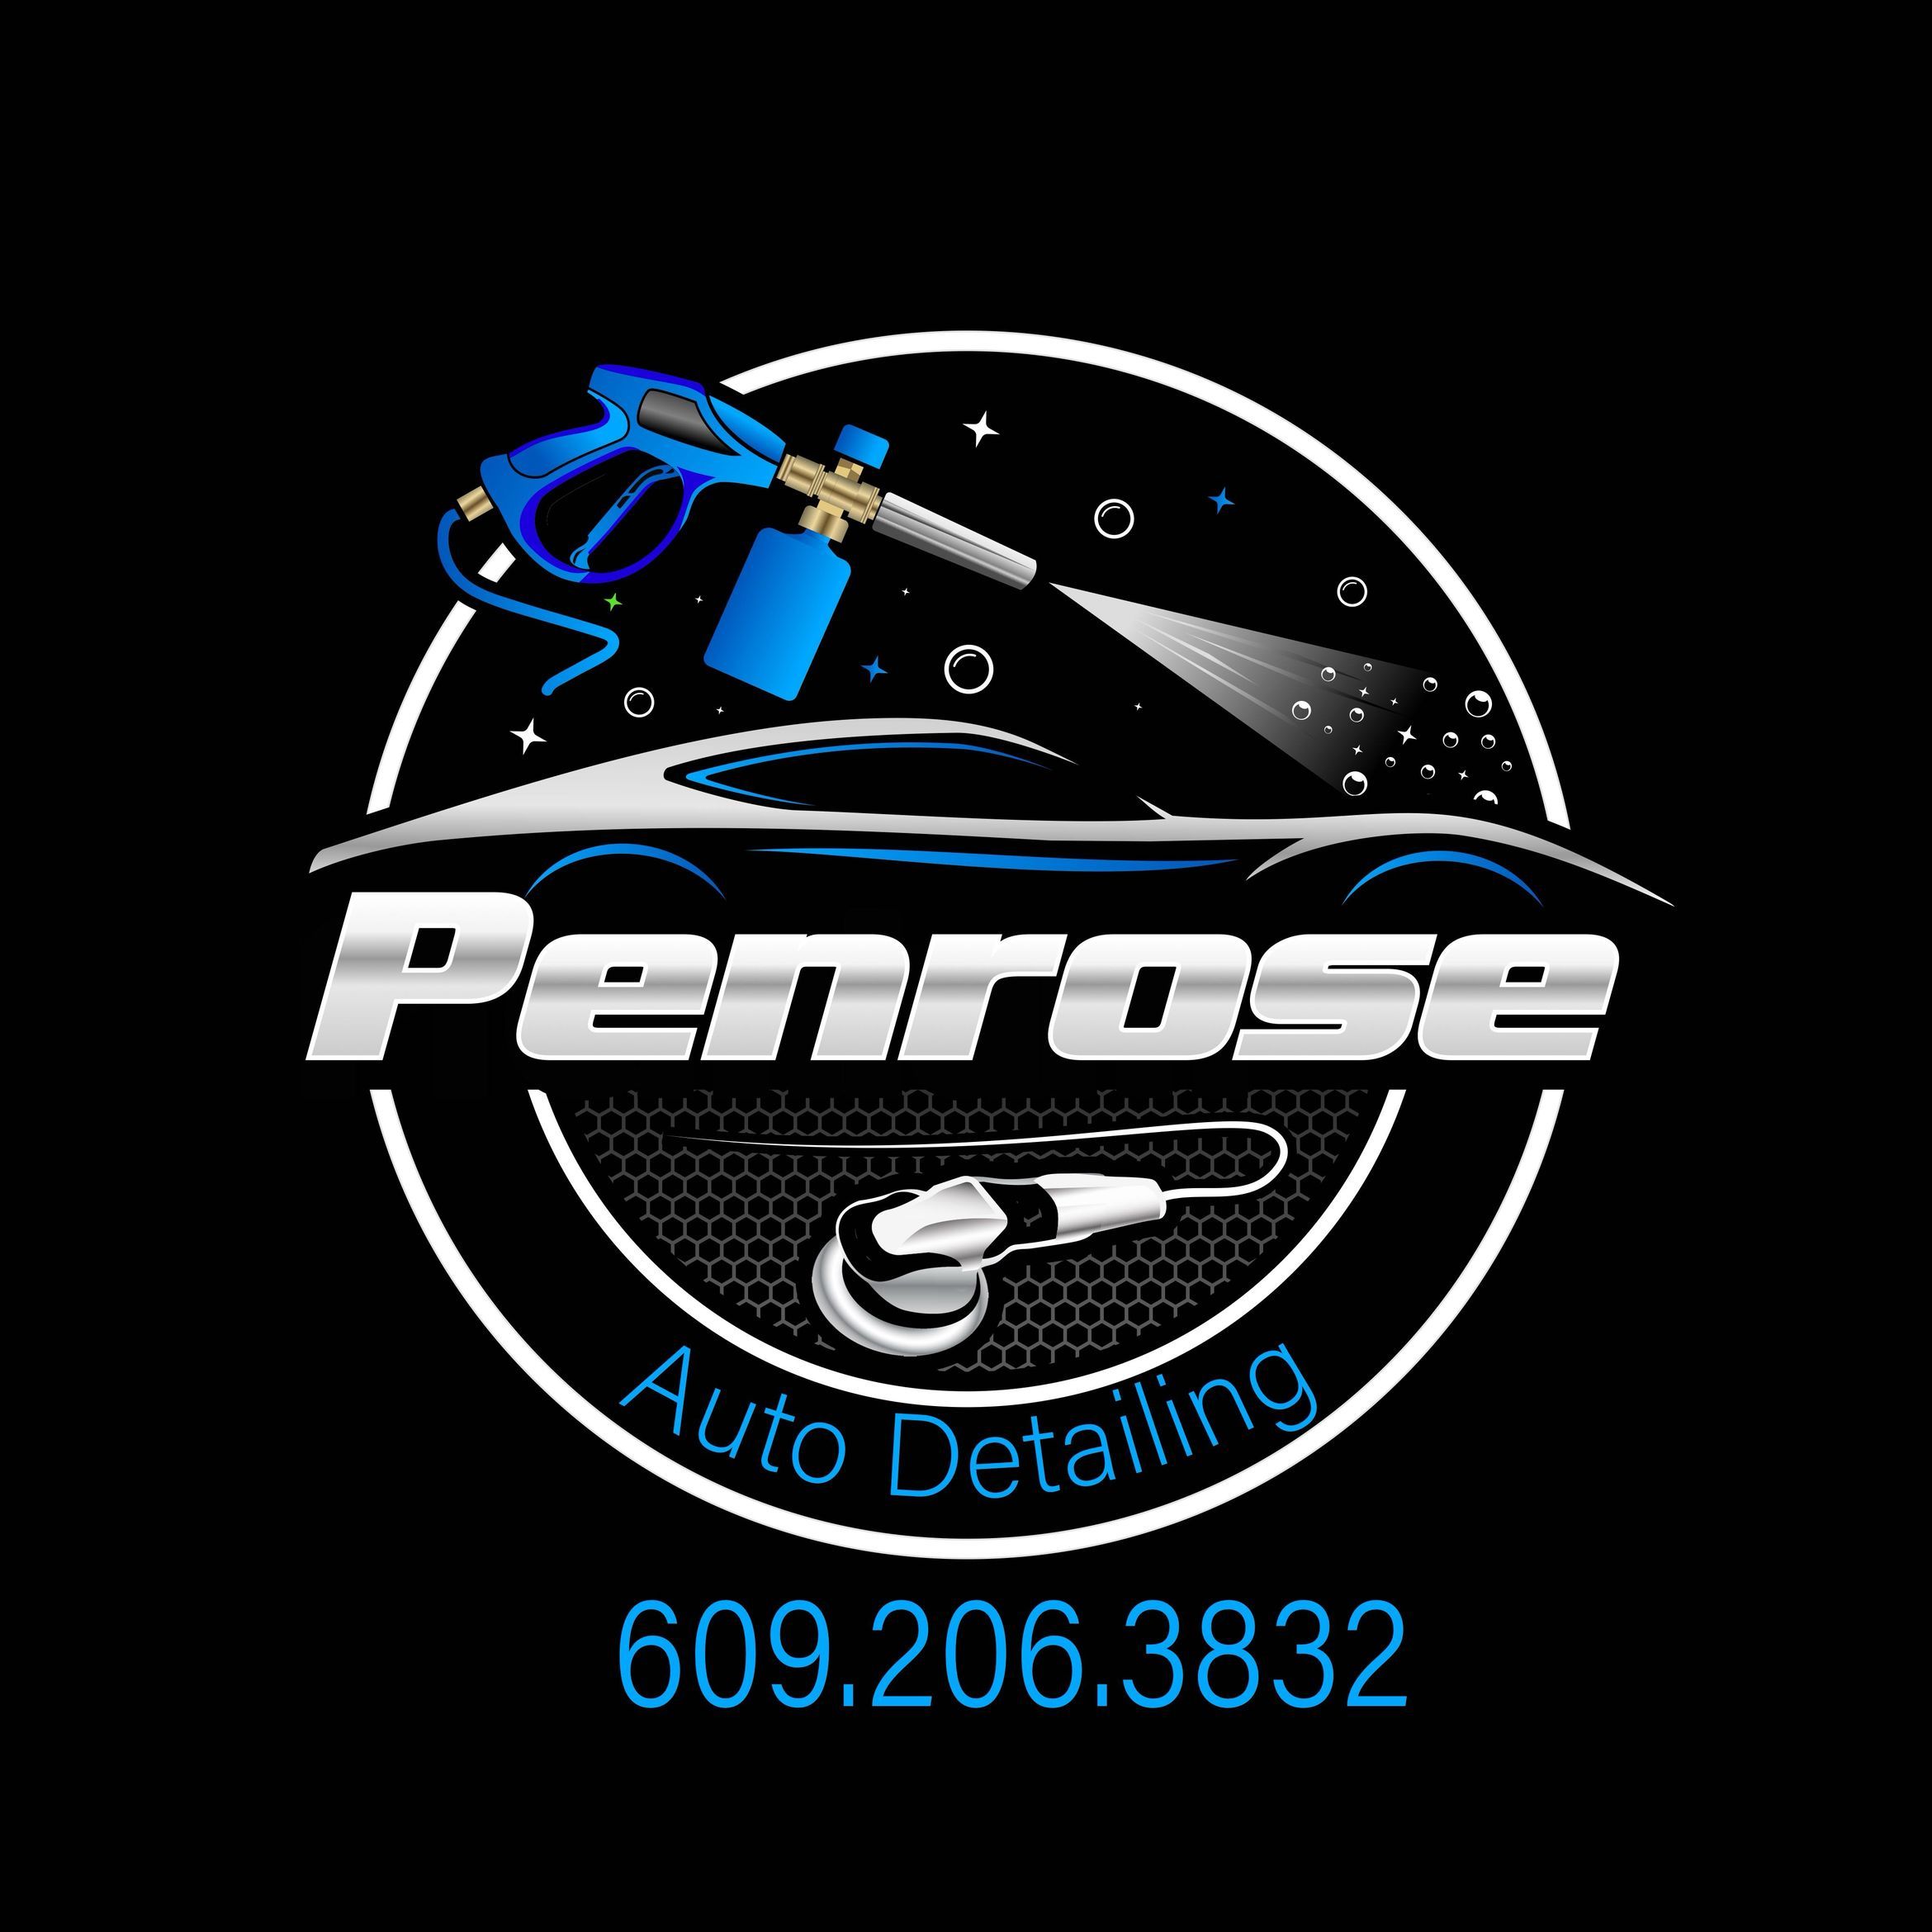 Penrose Auto Detailing, Green creek, Cape May Court House, 08210